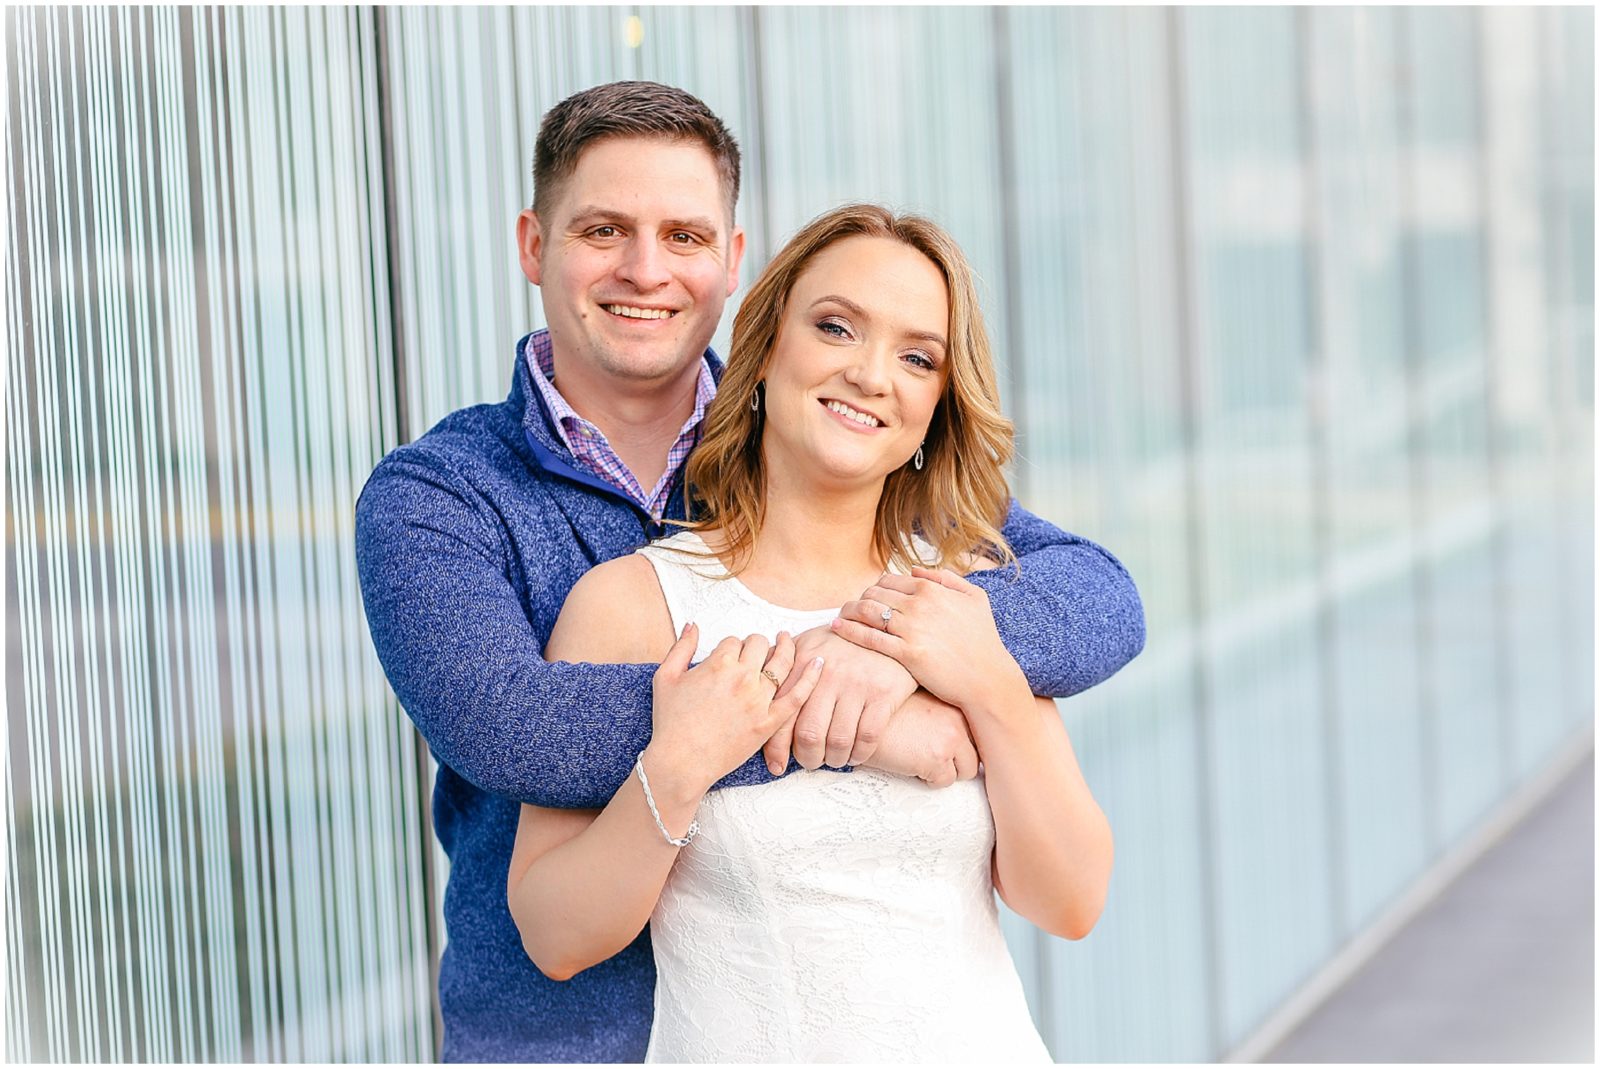 engagement photos - ideas for poses and what to wear - kansas city overland park missouri wedding photographer 